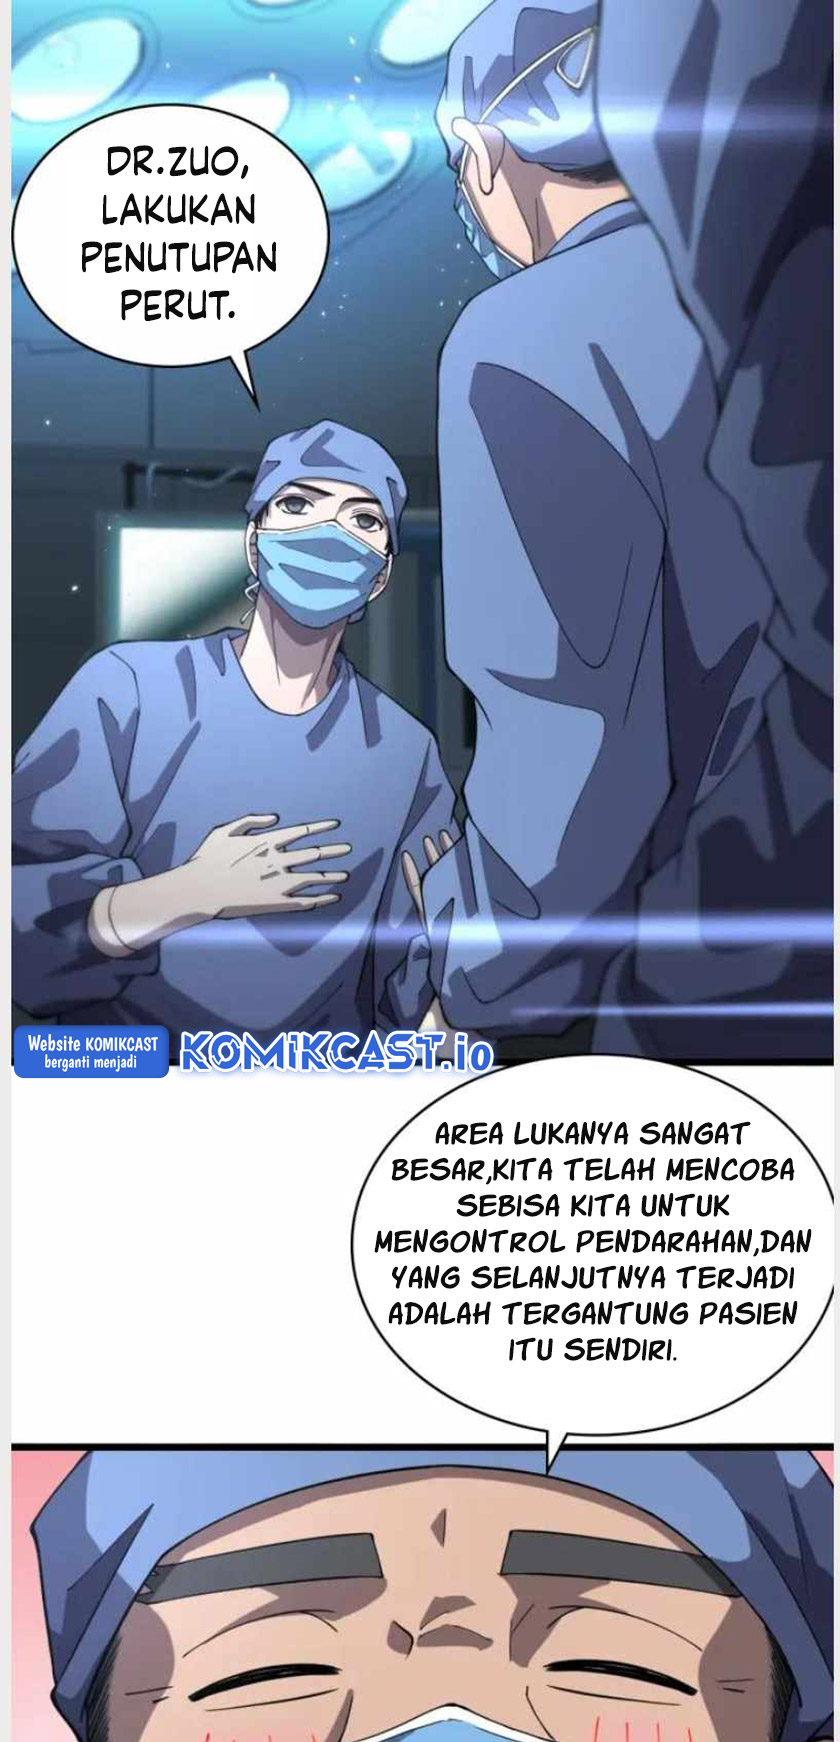 Great Doctor Ling Ran Chapter 145